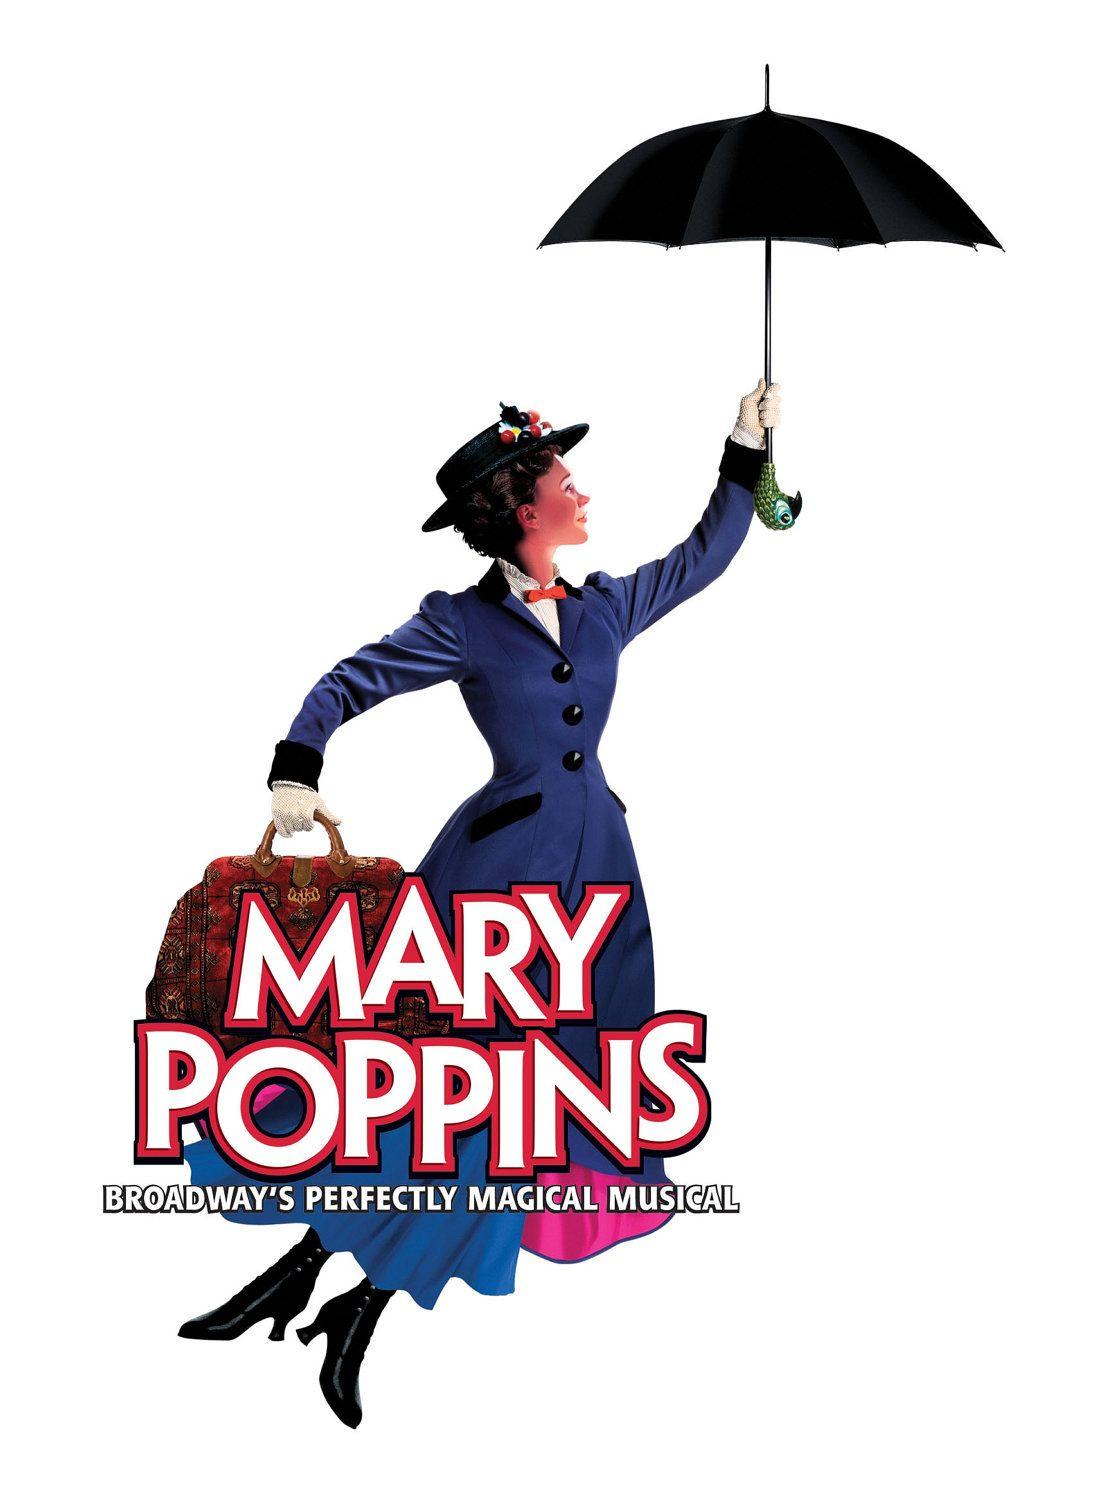 Mary Poppins Musical Broadway Show Times Square Theater NYC